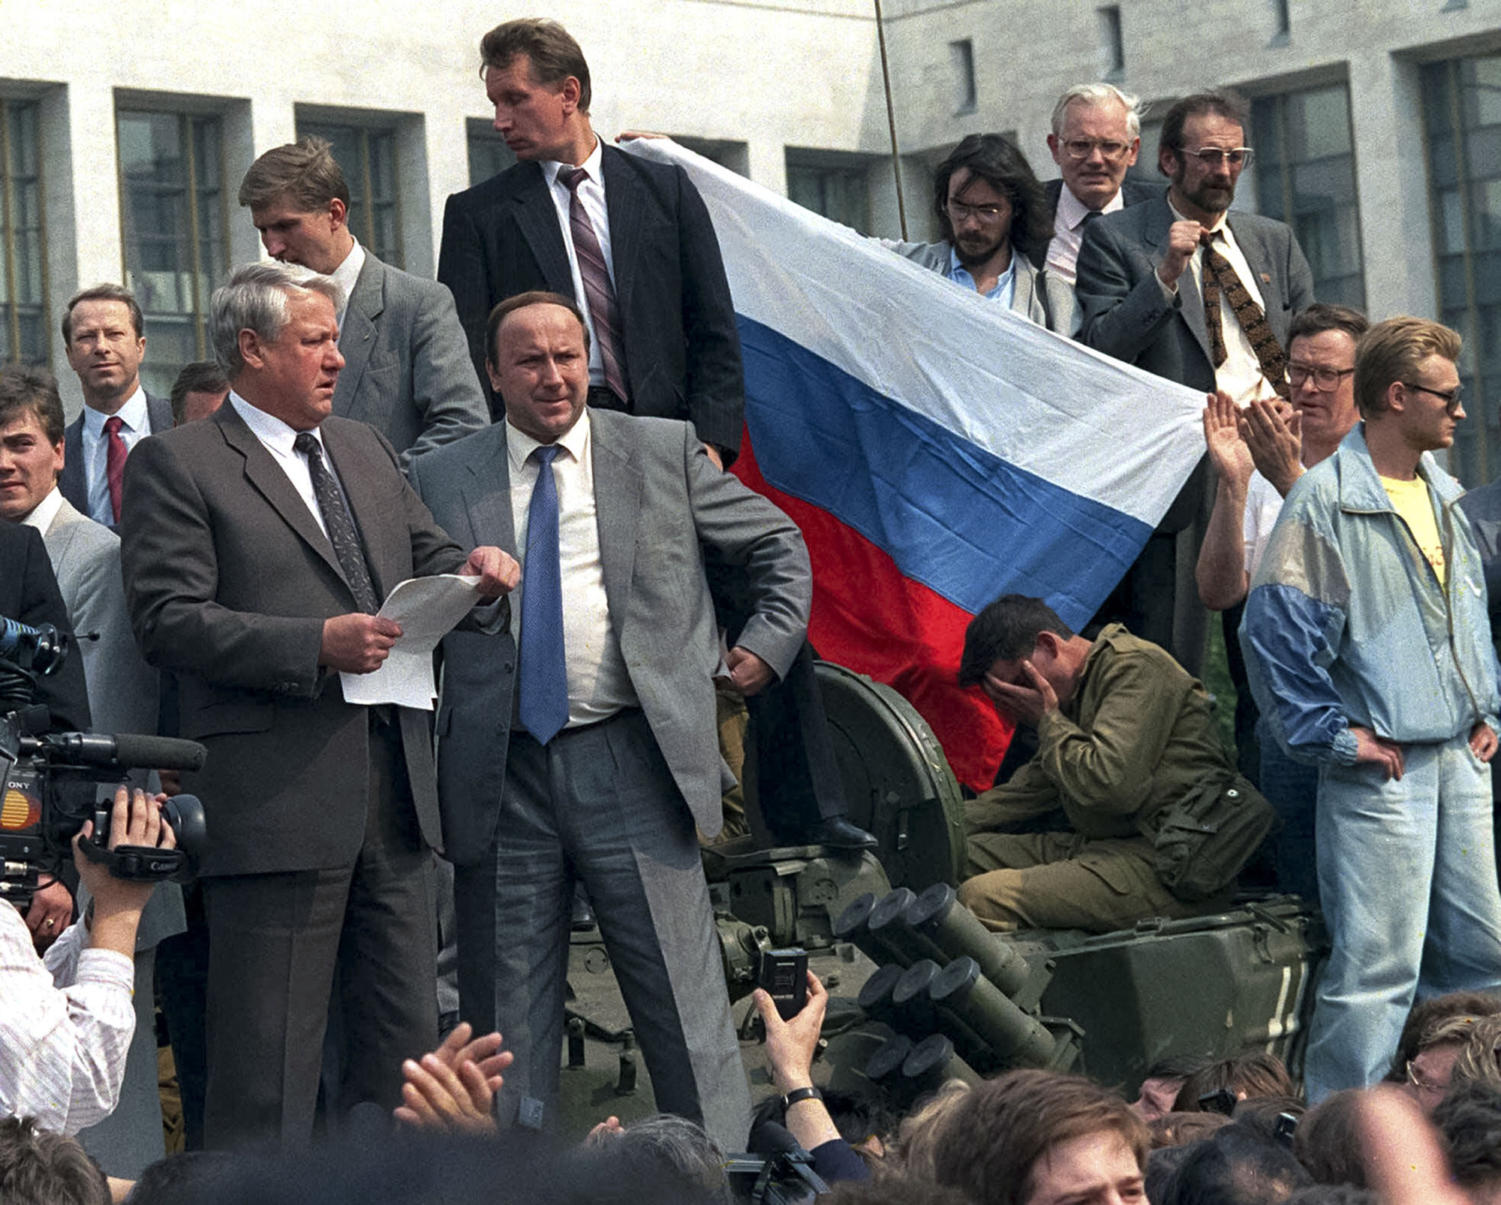 Russian President Boris Yeltsin conducts a speech relating to the coup, and cutting off military ties with the Soviet Union.